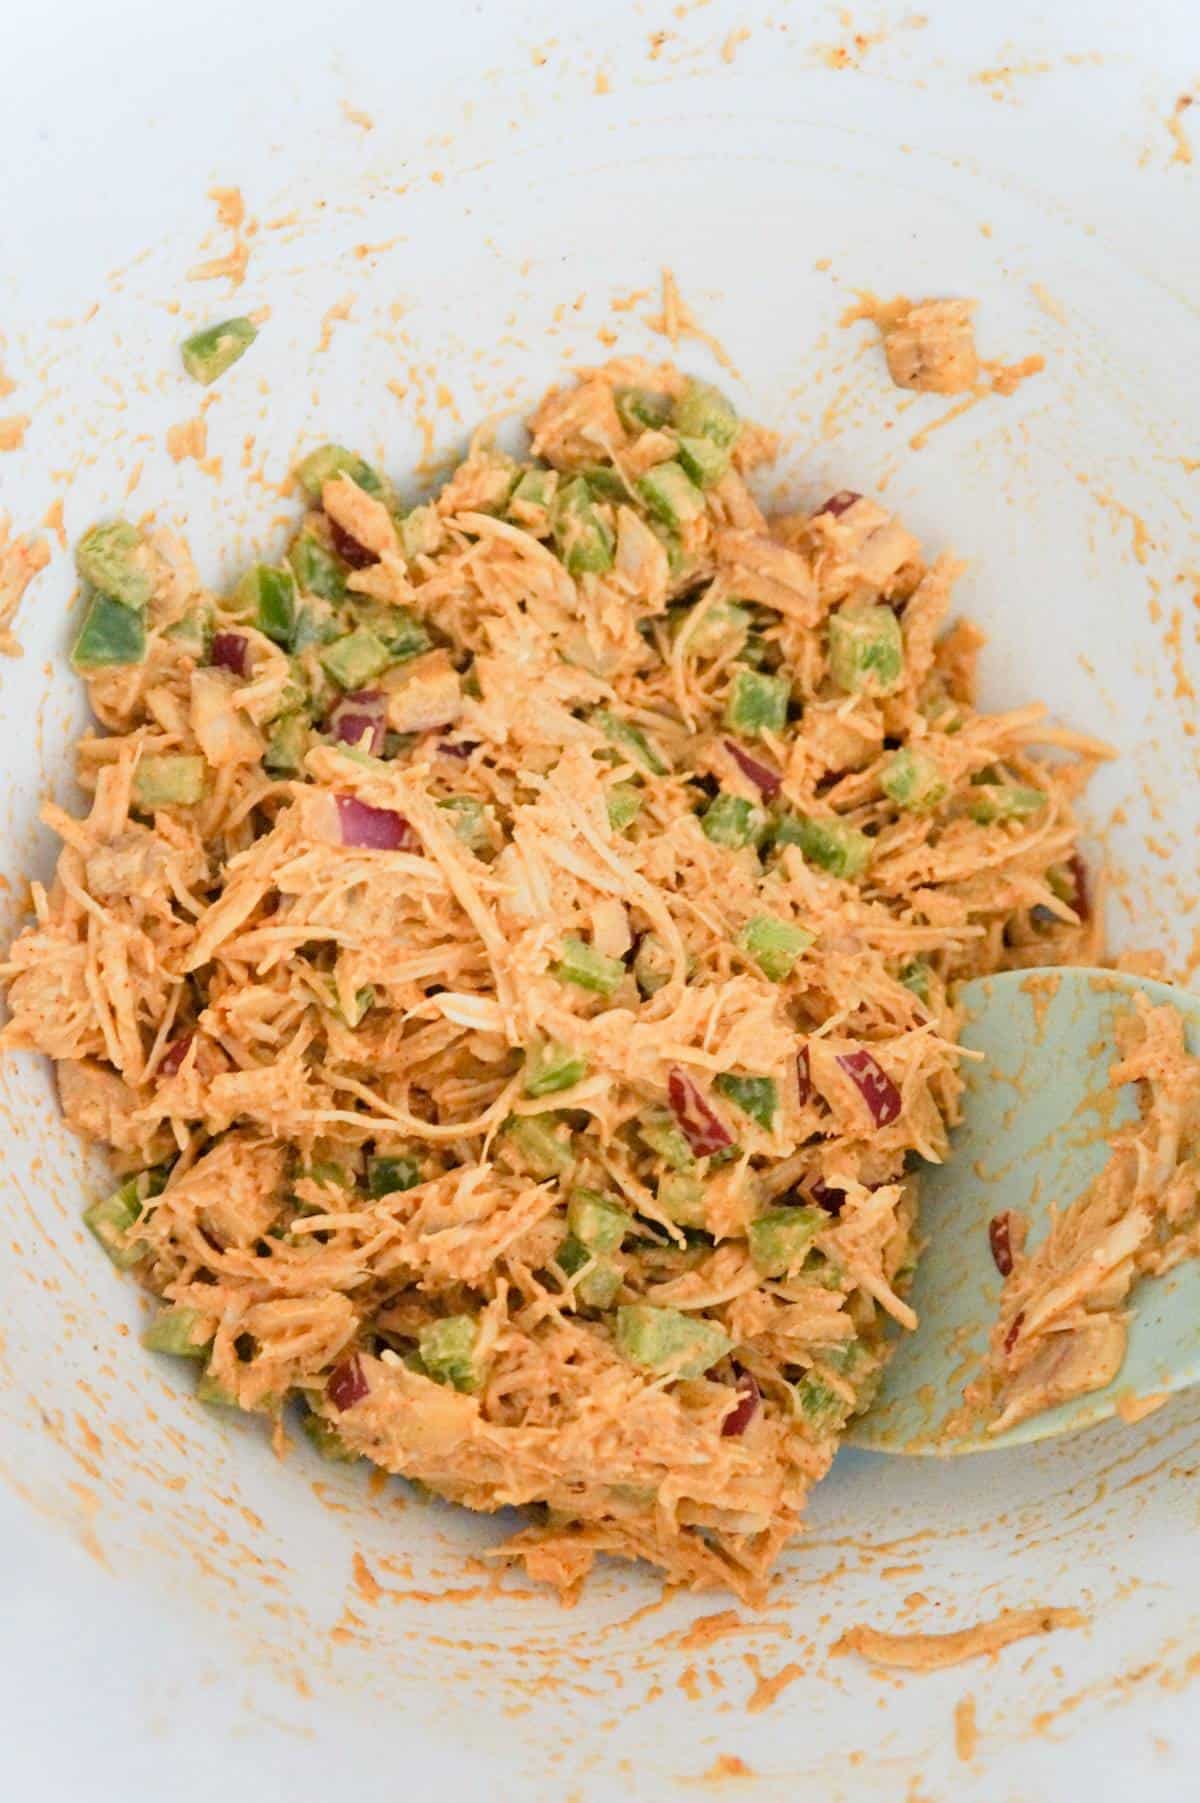 shredded chicken mixture with diced onions and peppers in a mixing bowl